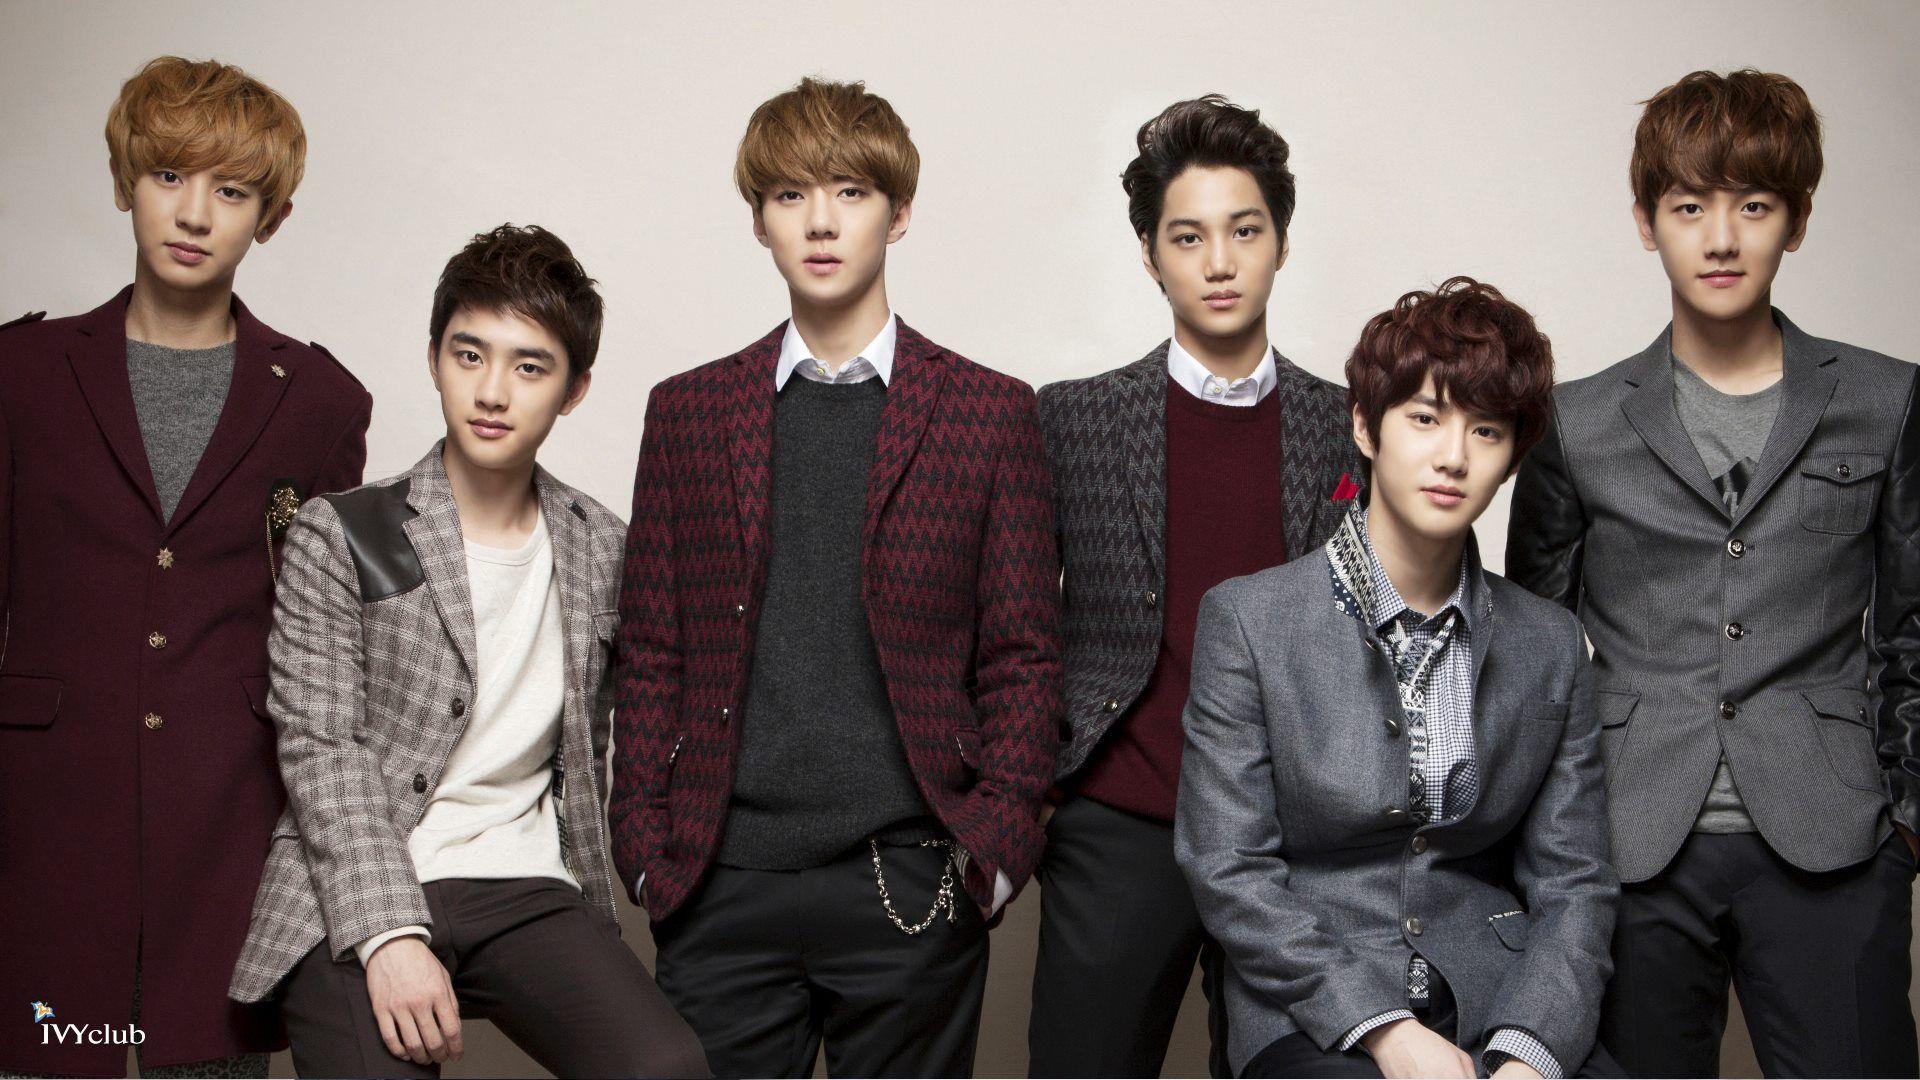 EXO K Ivy Club Official Site Update. EXO Planet. Ivy